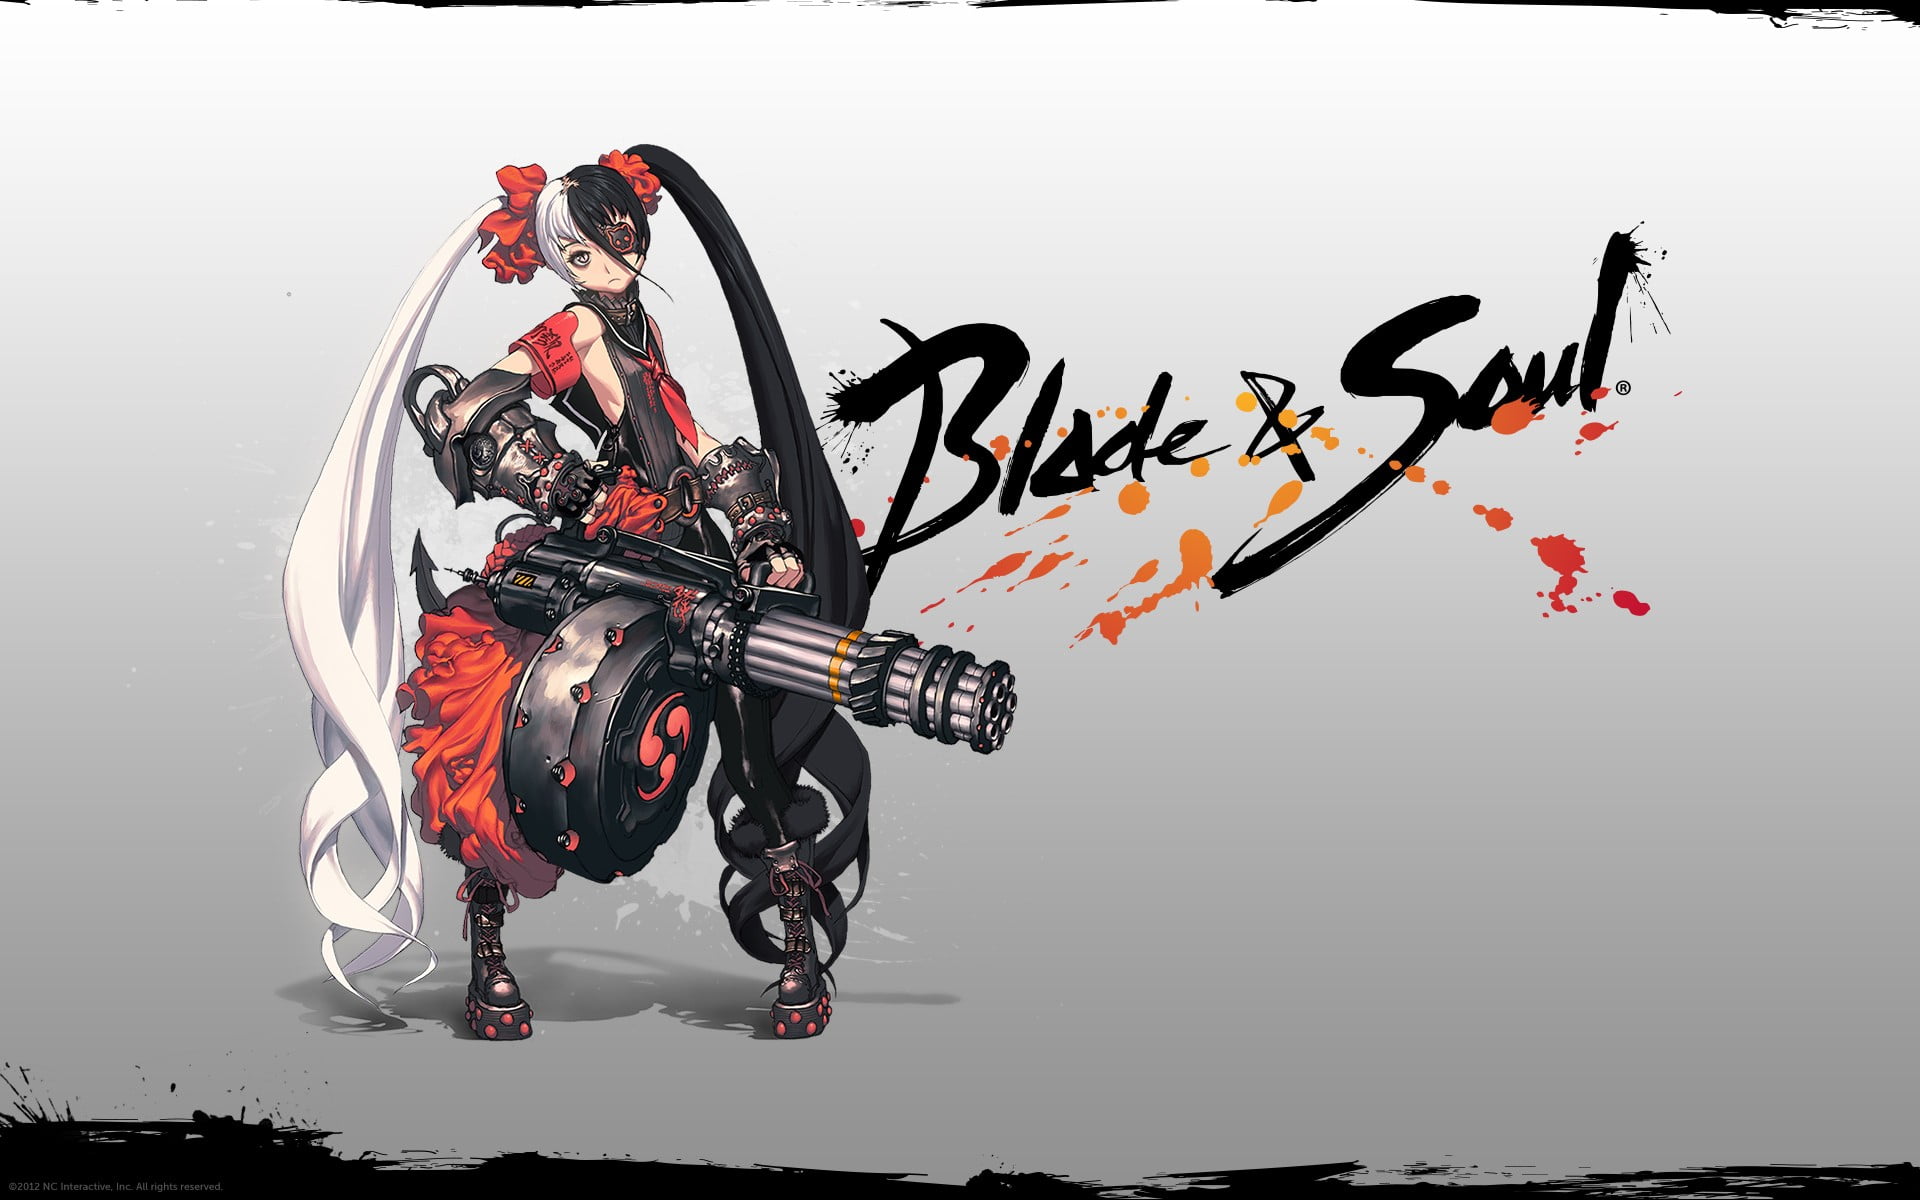 Blade& Soul PC game illustration, Blade and Soul, minigun, real people